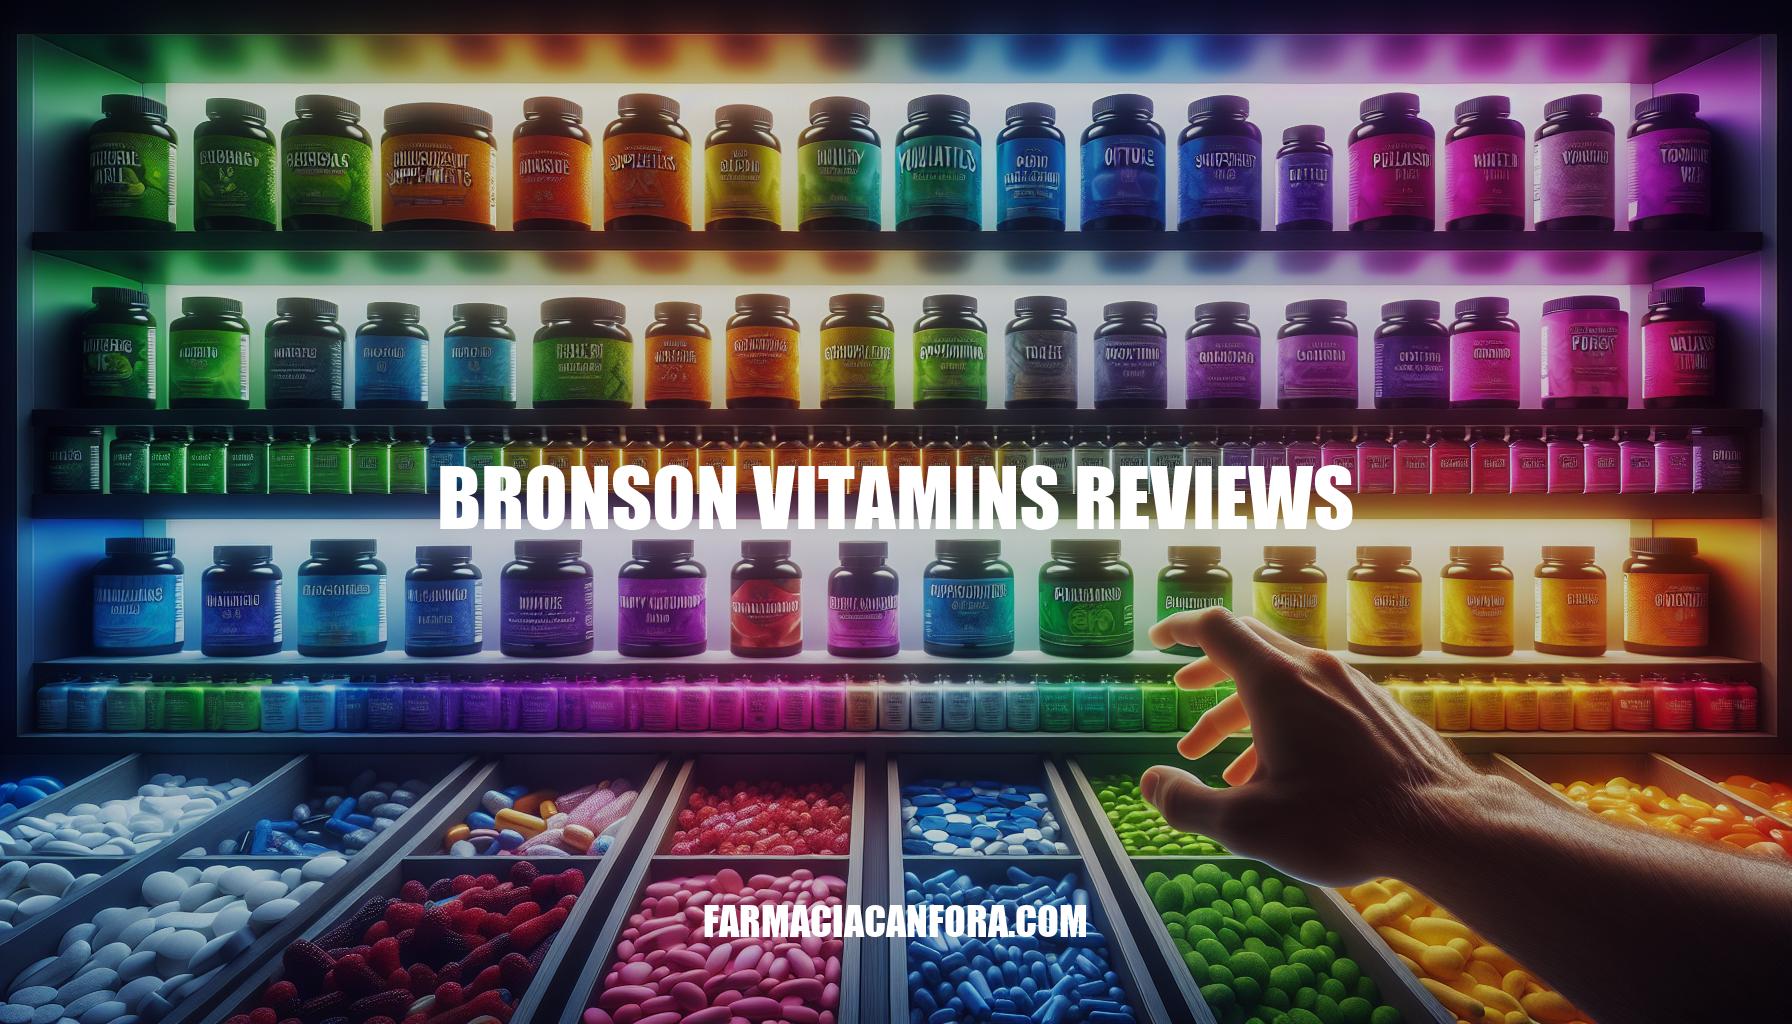 Bronson Vitamins Reviews: A Comprehensive Guide to Quality Dietary Supplements